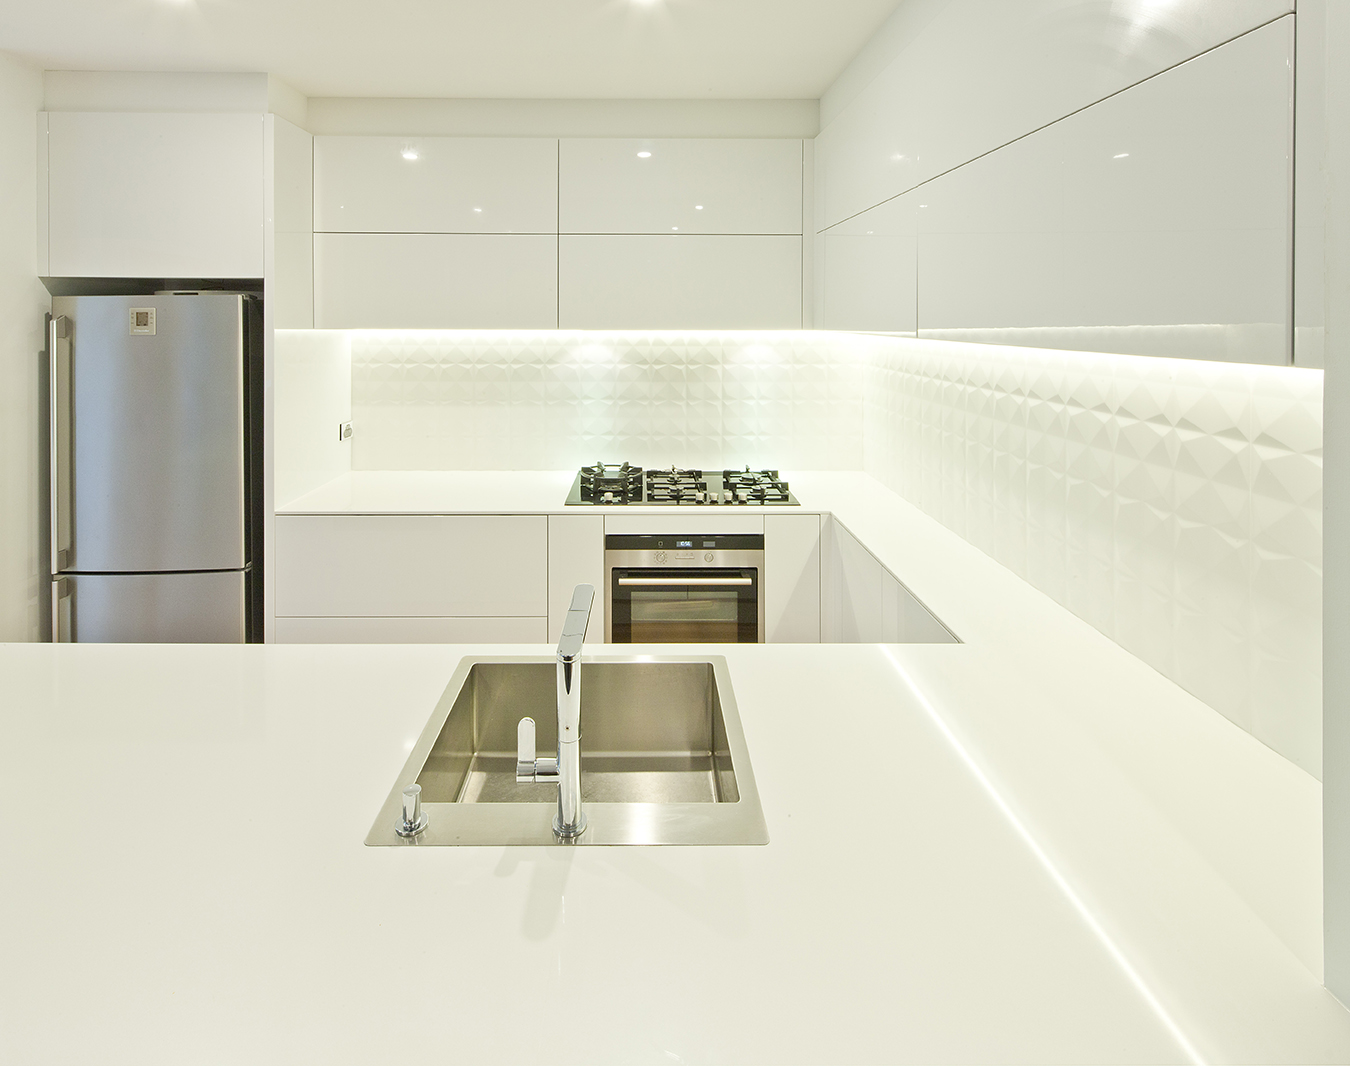 South Yarra House for MINT Kitchens